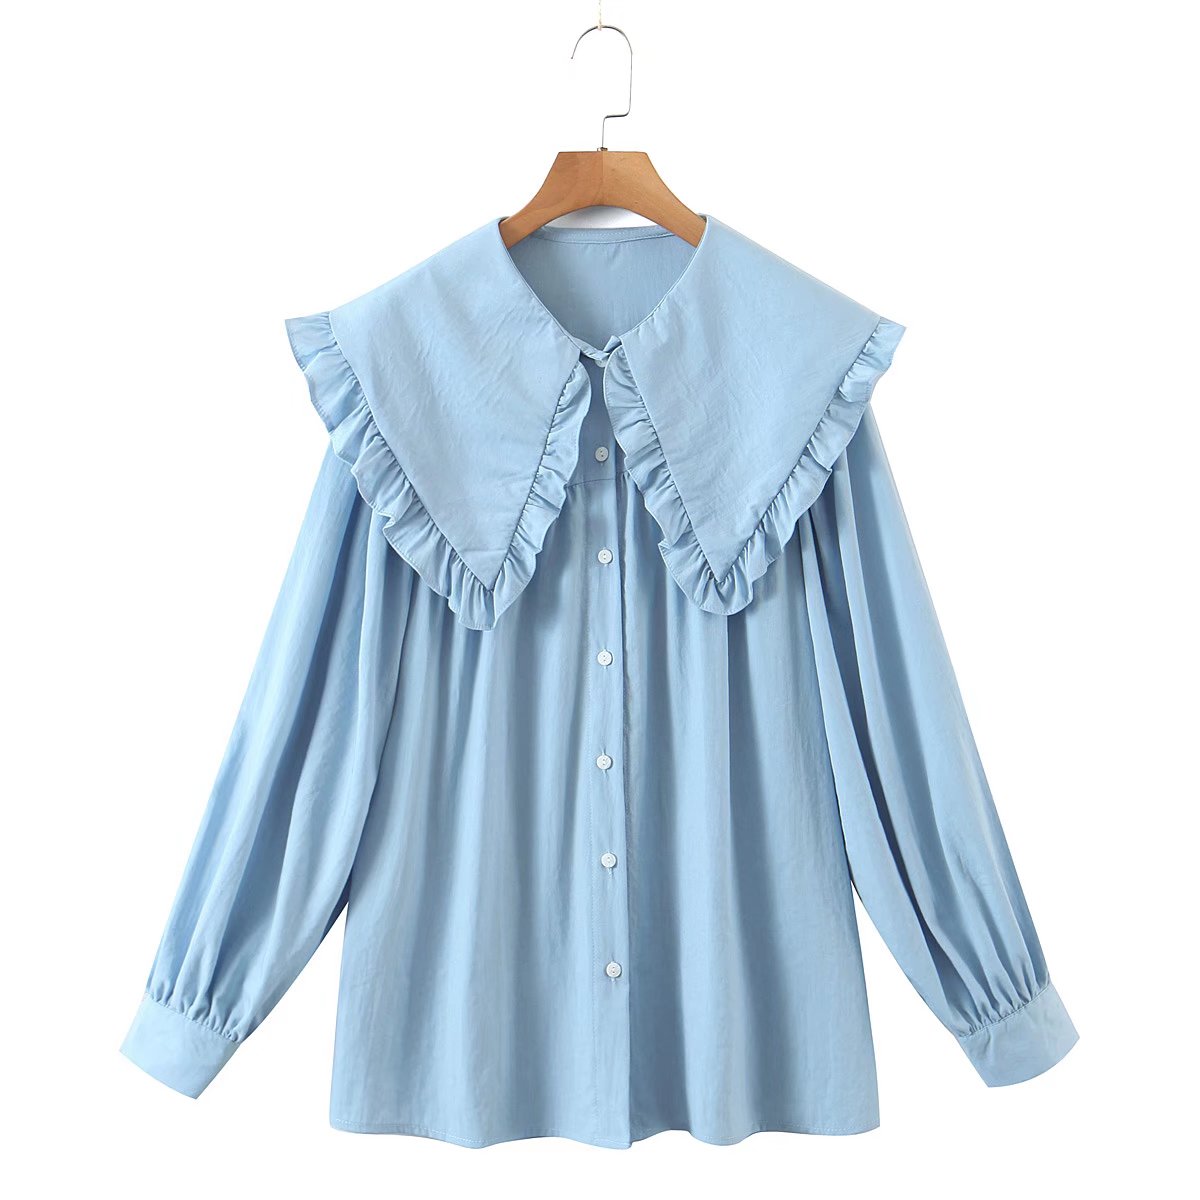 OOTDGIRL Sweet Blue Button-Up Loose Blouses Women's Peter Pan Collar Long Sleeve Female Shirts Chic Tops